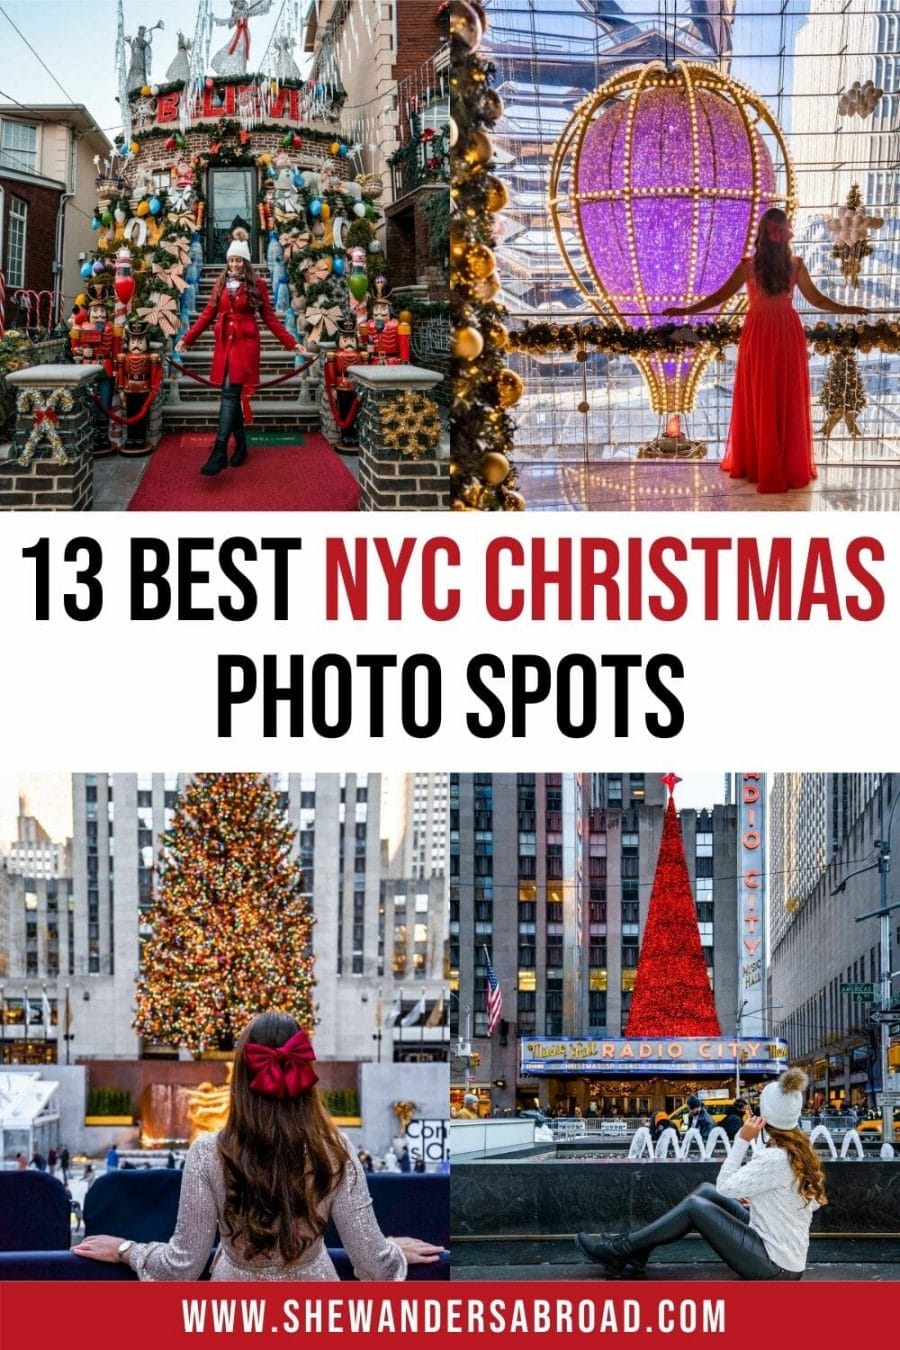 13 Best NYC Christmas Photo Spots You Can't Miss